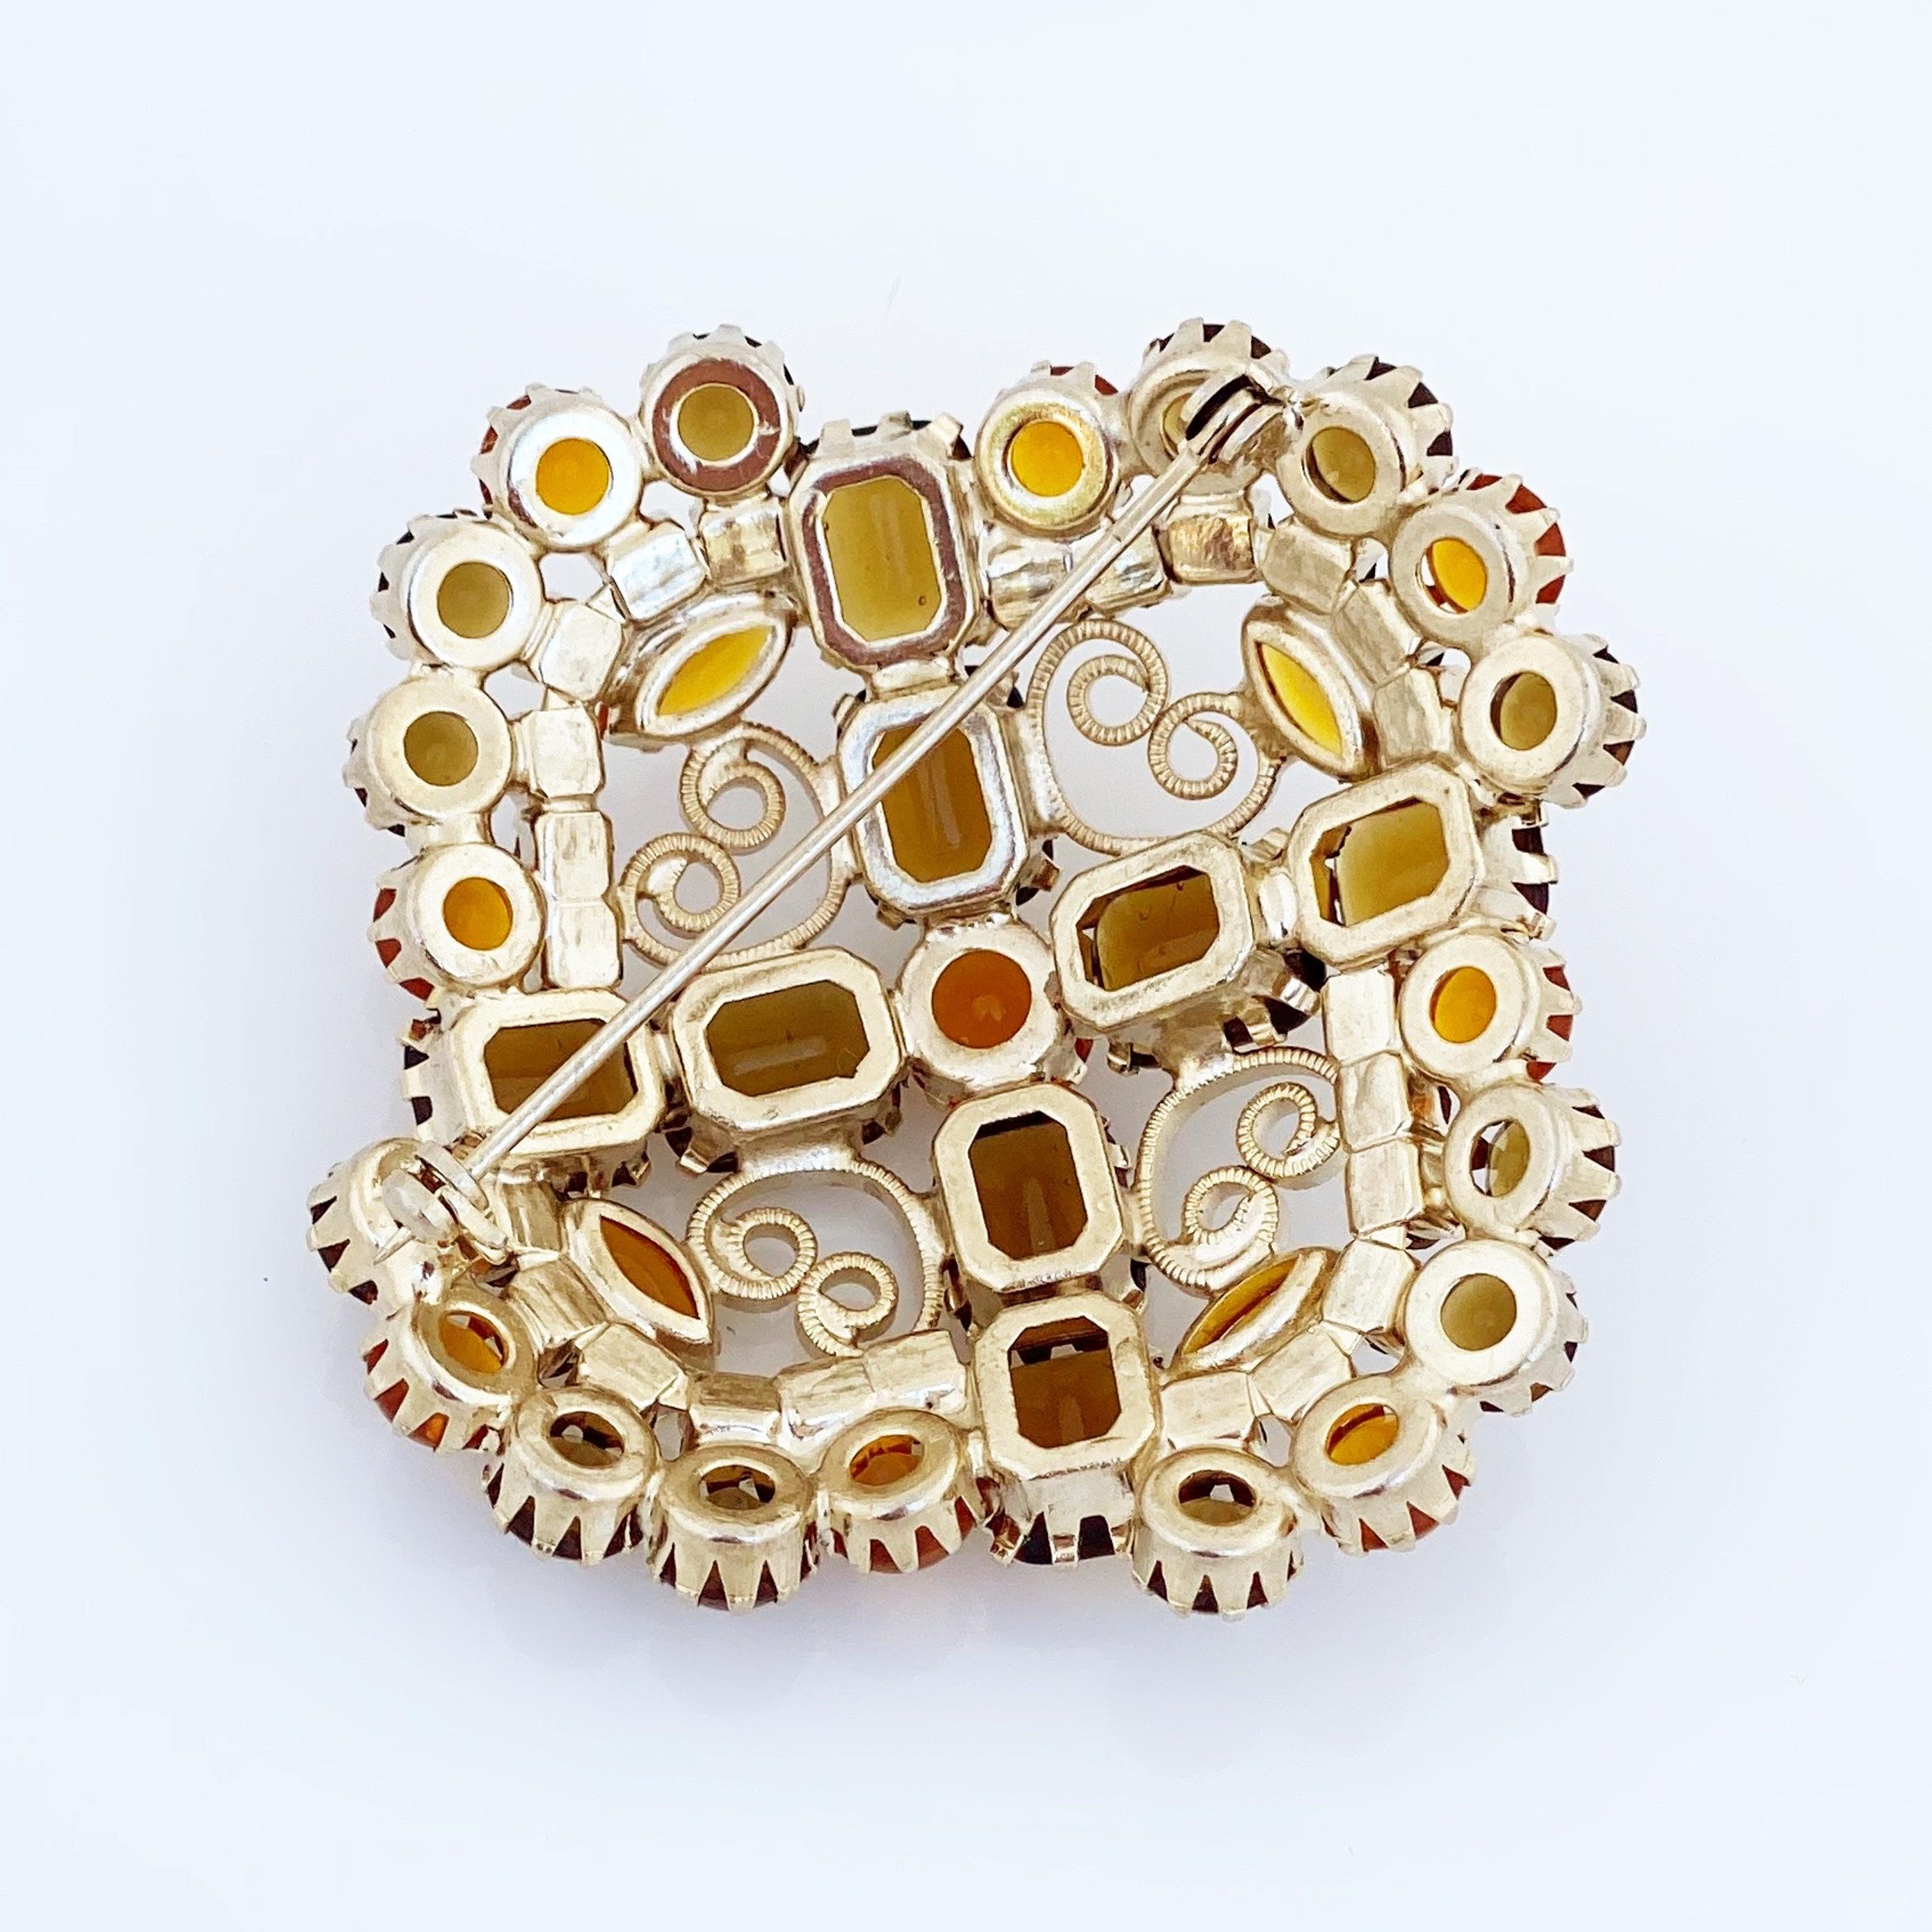 Topaz Juliana Rhinestone Brooch With Heart Scrolls By DeLizza & Elster, 1960s In Good Condition For Sale In McKinney, TX